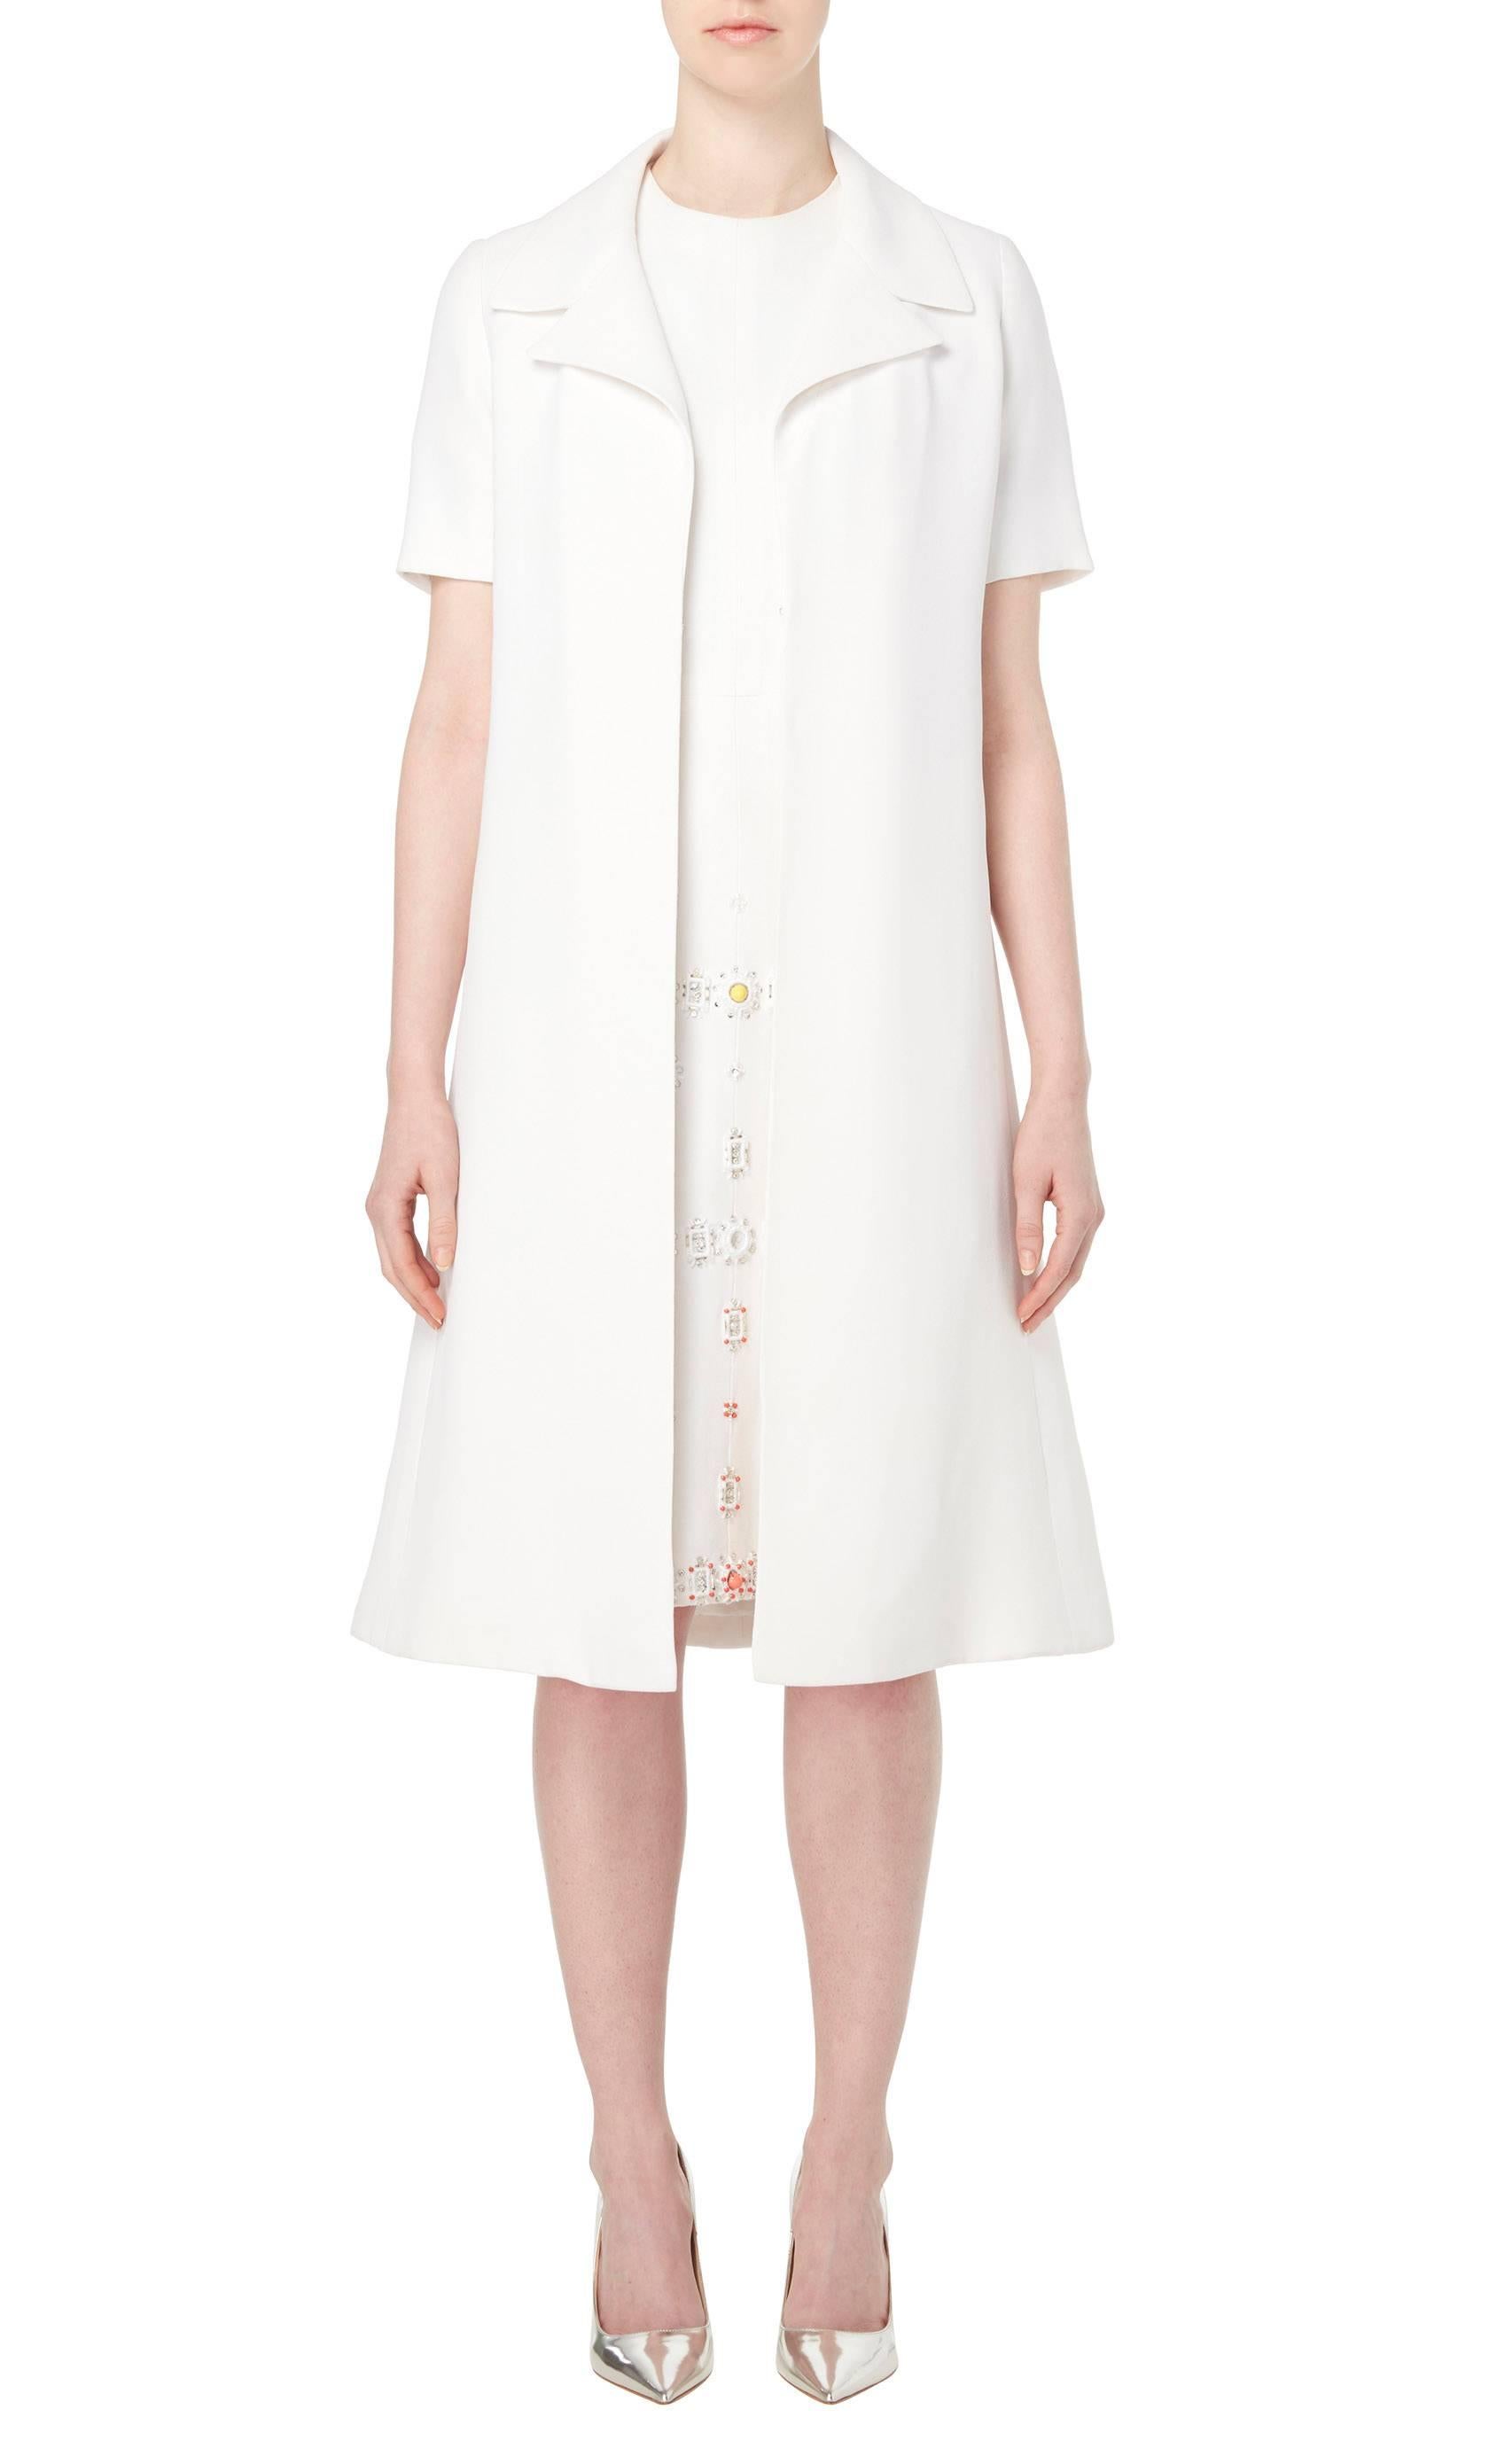 This Jean Patou two-piece consists of a dress and jacket, both in constructed ivory crepe. The dress features a round neckline, short sleeves and an A-line silhouette, while the skirt is embellished with rows of yellow, turquoise and coral domed